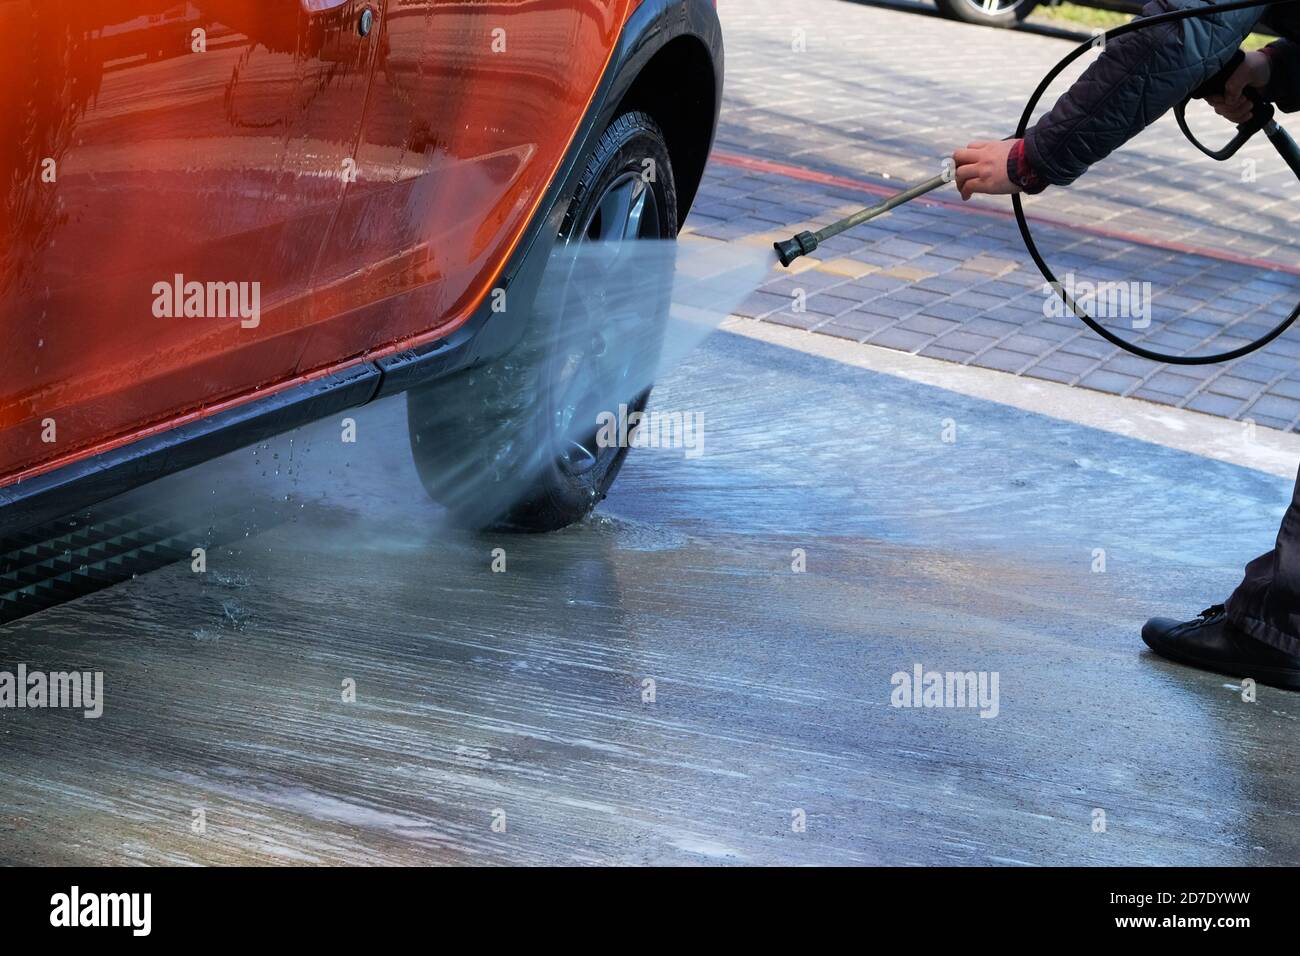 Washing with clean water at self-service car wash. Man washes his orange car at car wash in outdoors. Stock Photo